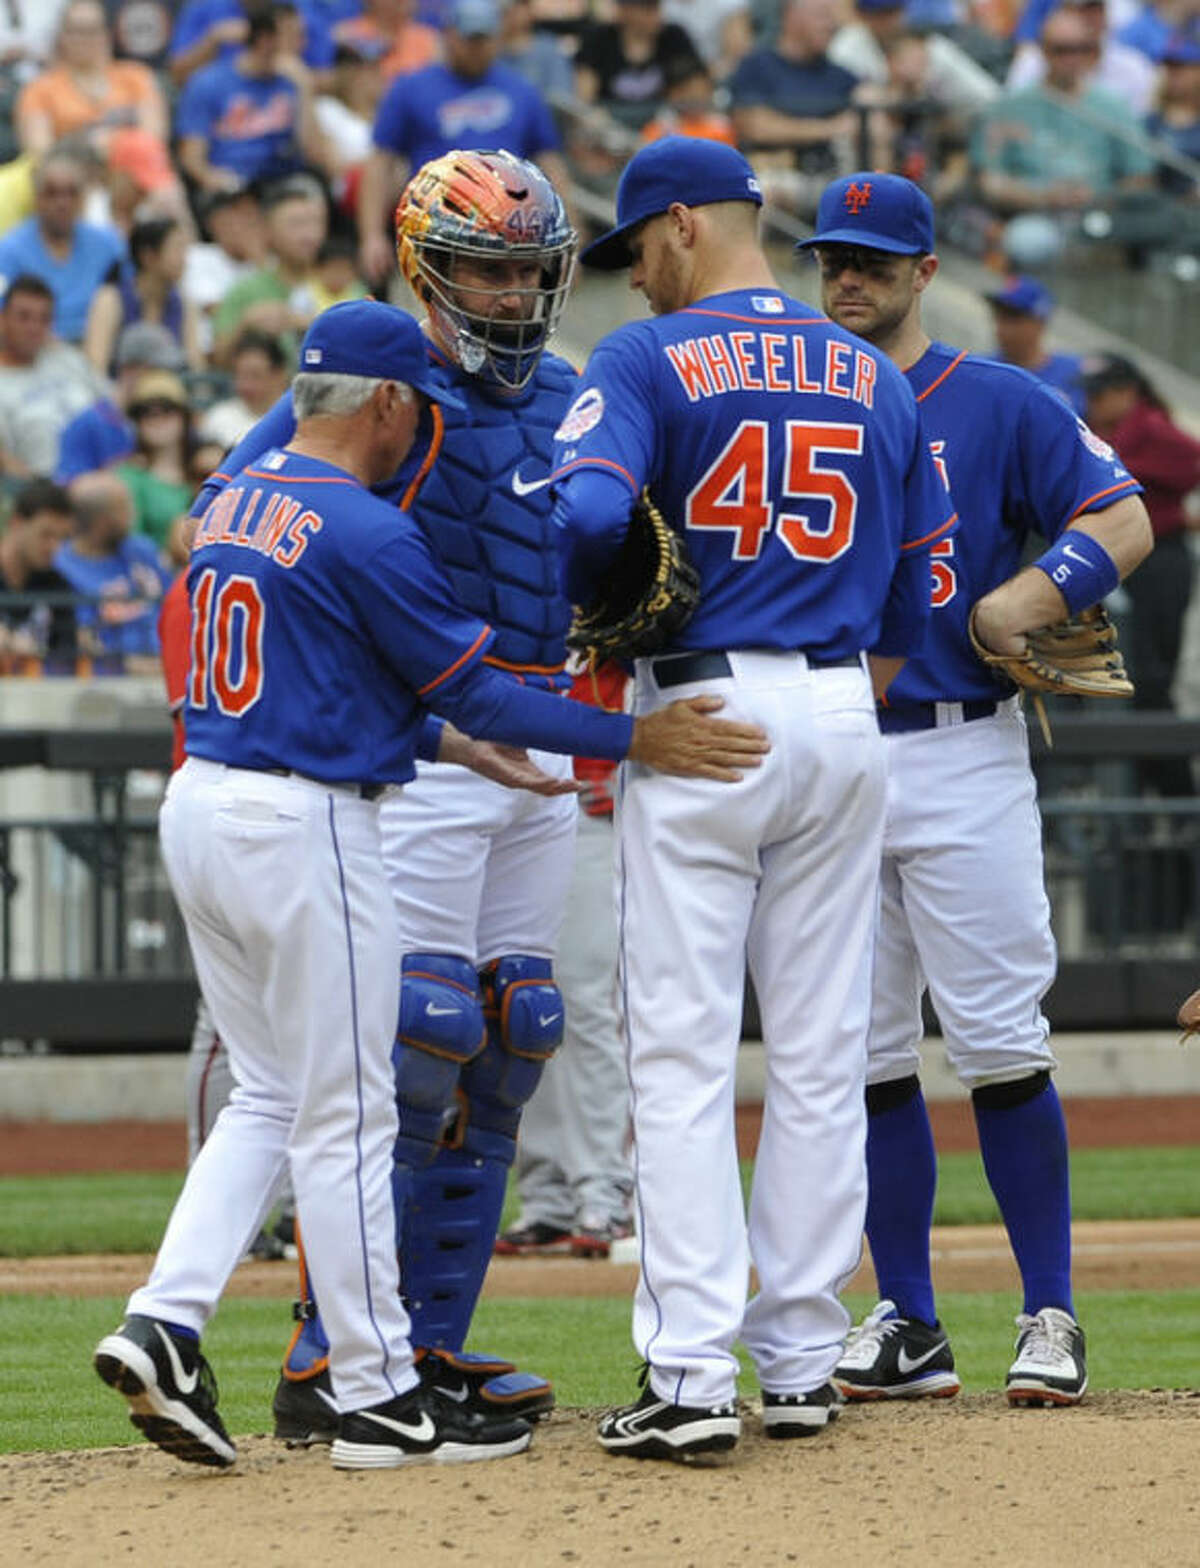 New York Mets York catcher John Buck and David Wright watch as manager Terry Collins (10) takes starting pitcher Zack Wheeler (45) out of the baseball game against the Washington Nationals' in the fifth inning at Citi Field on Sunday, June 30, 2013 in New (AP Photo/Kathy Kmonicek)